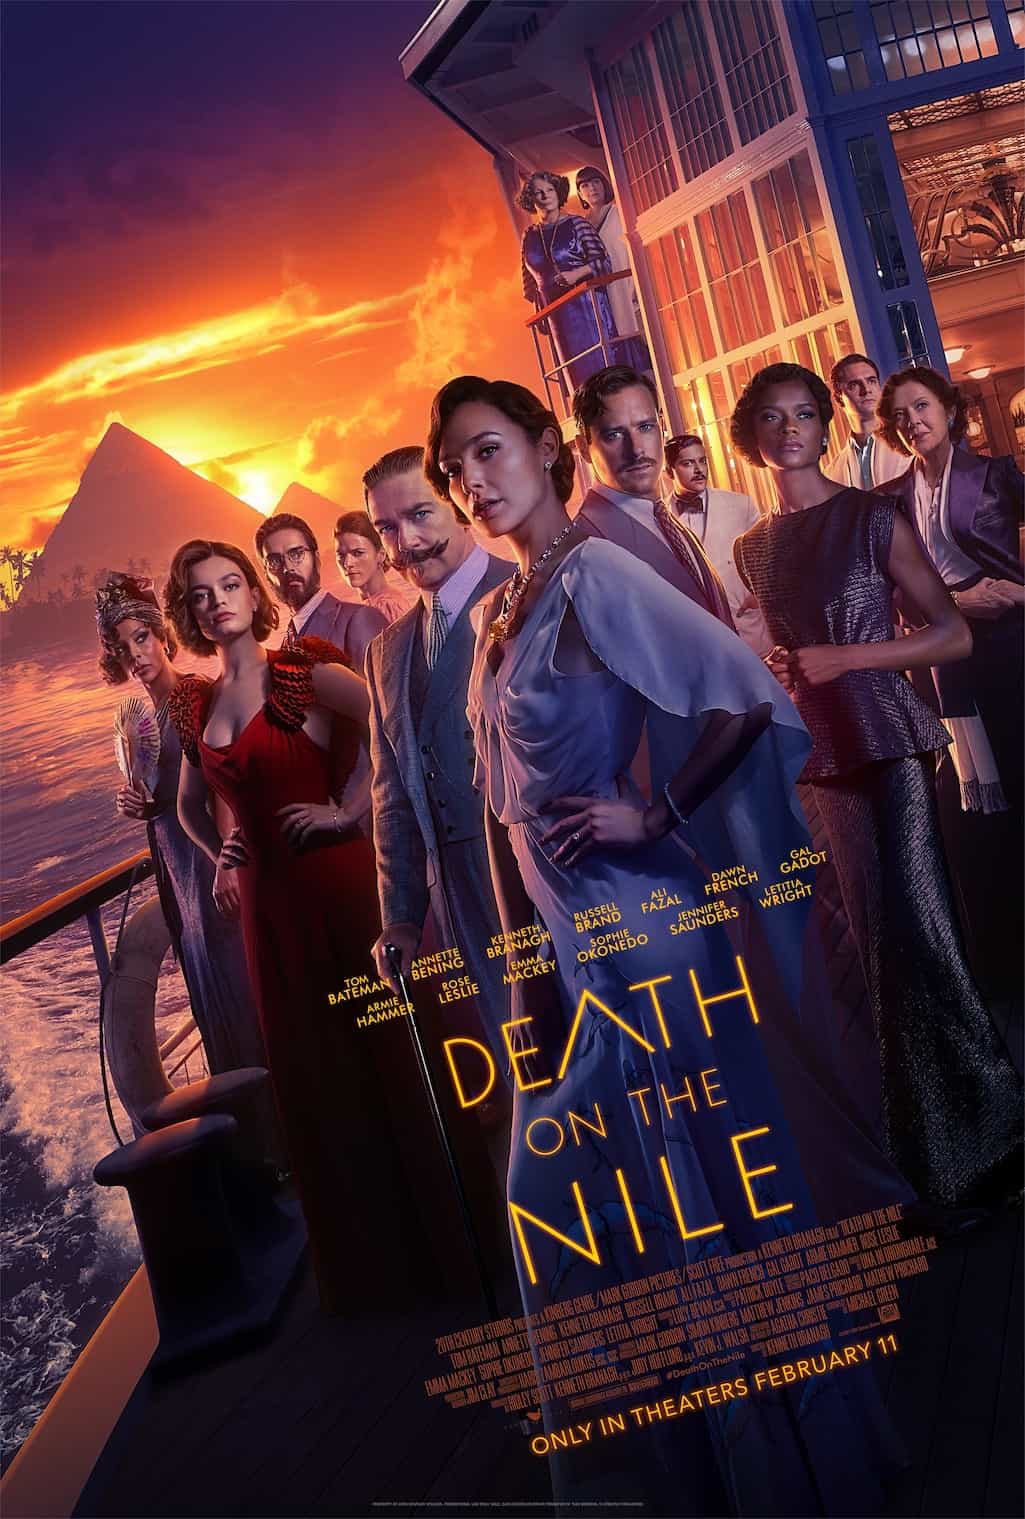 Death on the Nile (2022) is given a 12A rating in the UK for moderate violence, bloody images, injury detail, sex references